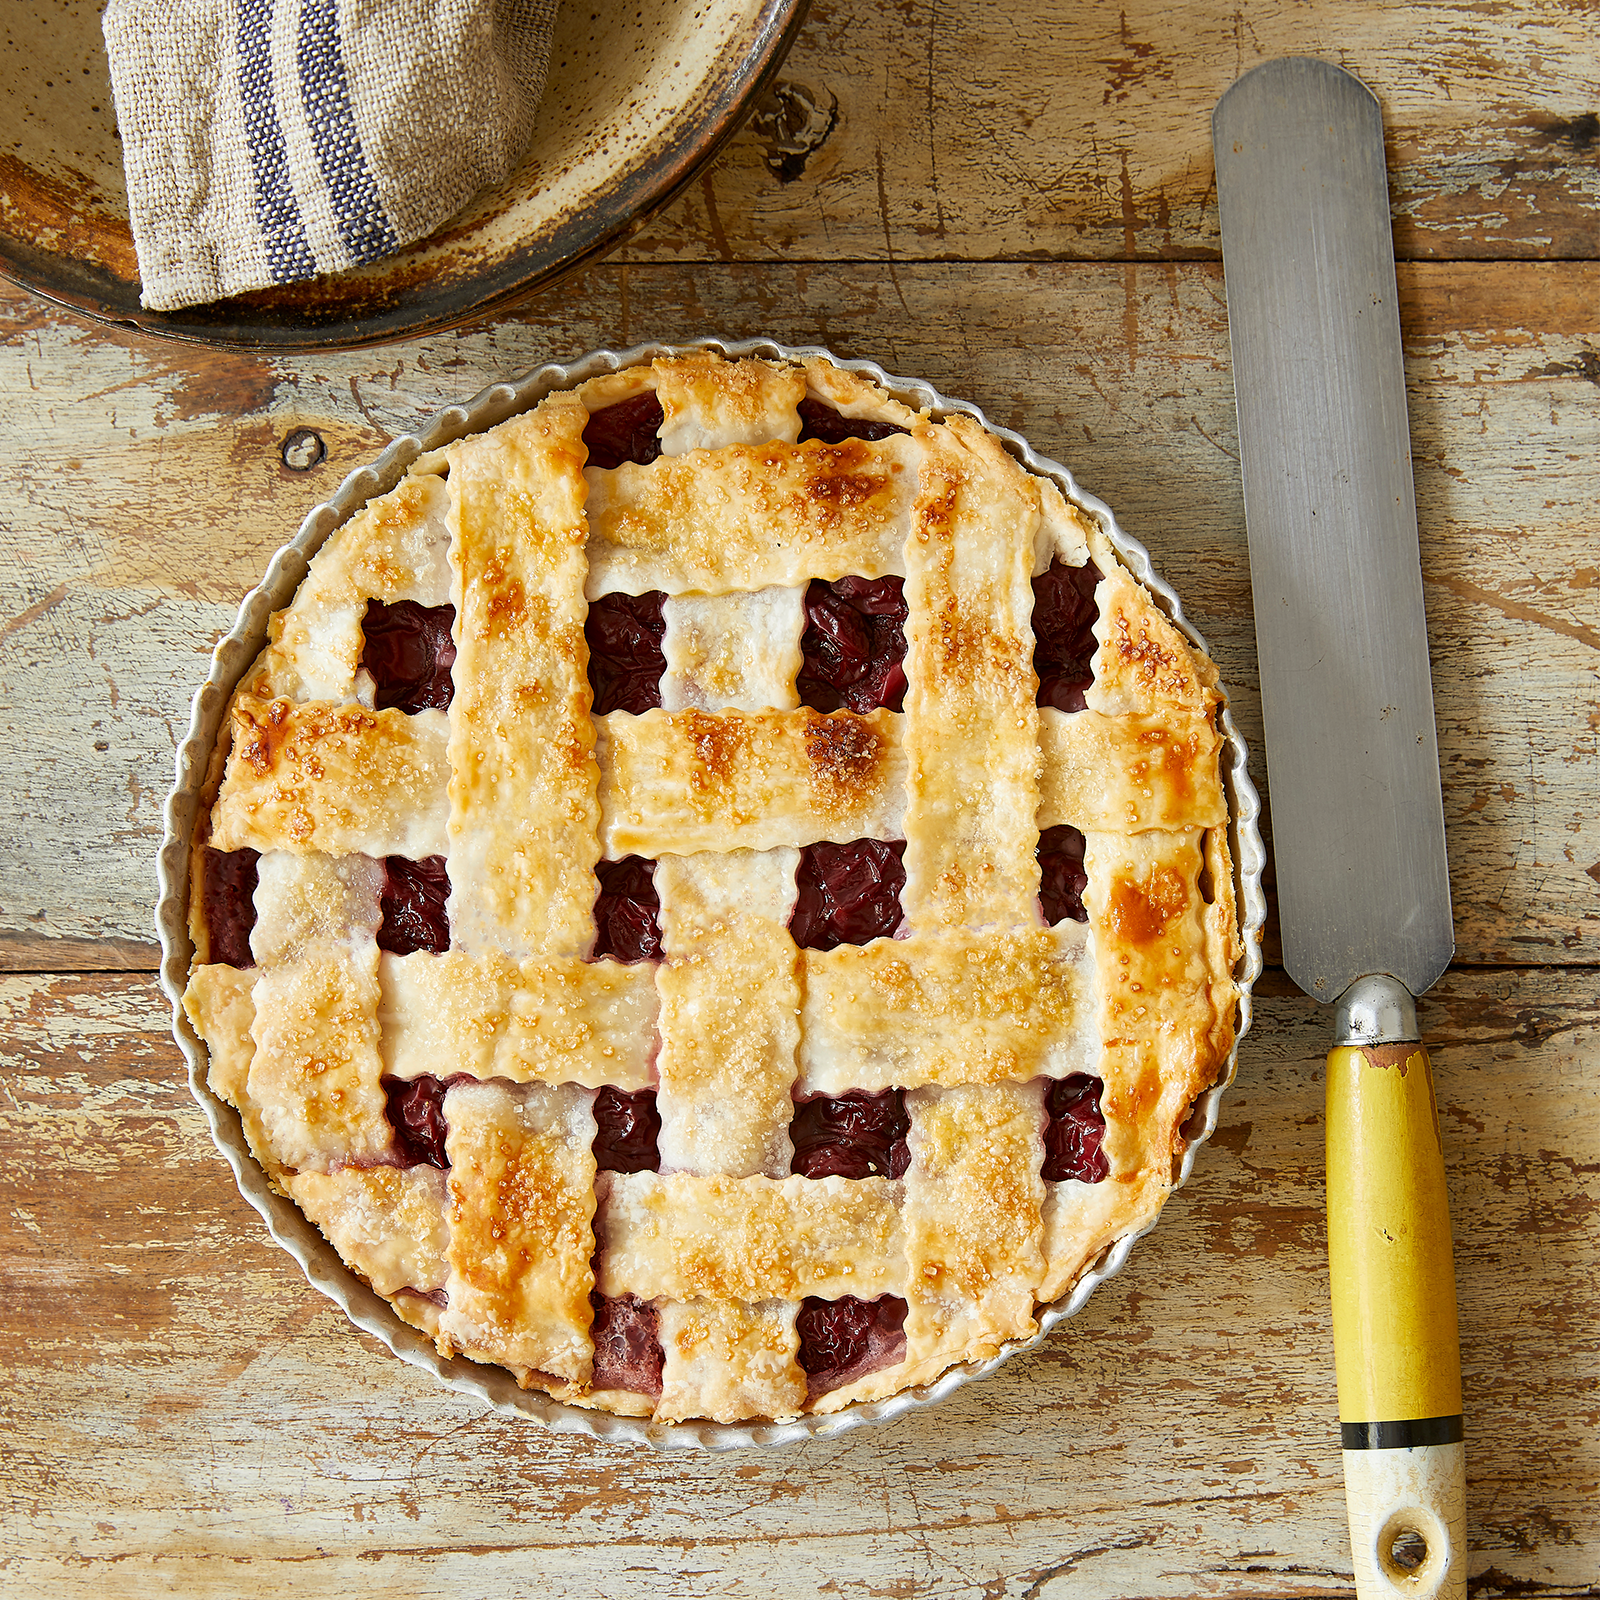 A gluten-free cherry pie on a wooden background. The pie is in a metal pie tin and has a lattice gluten-free pastry top.